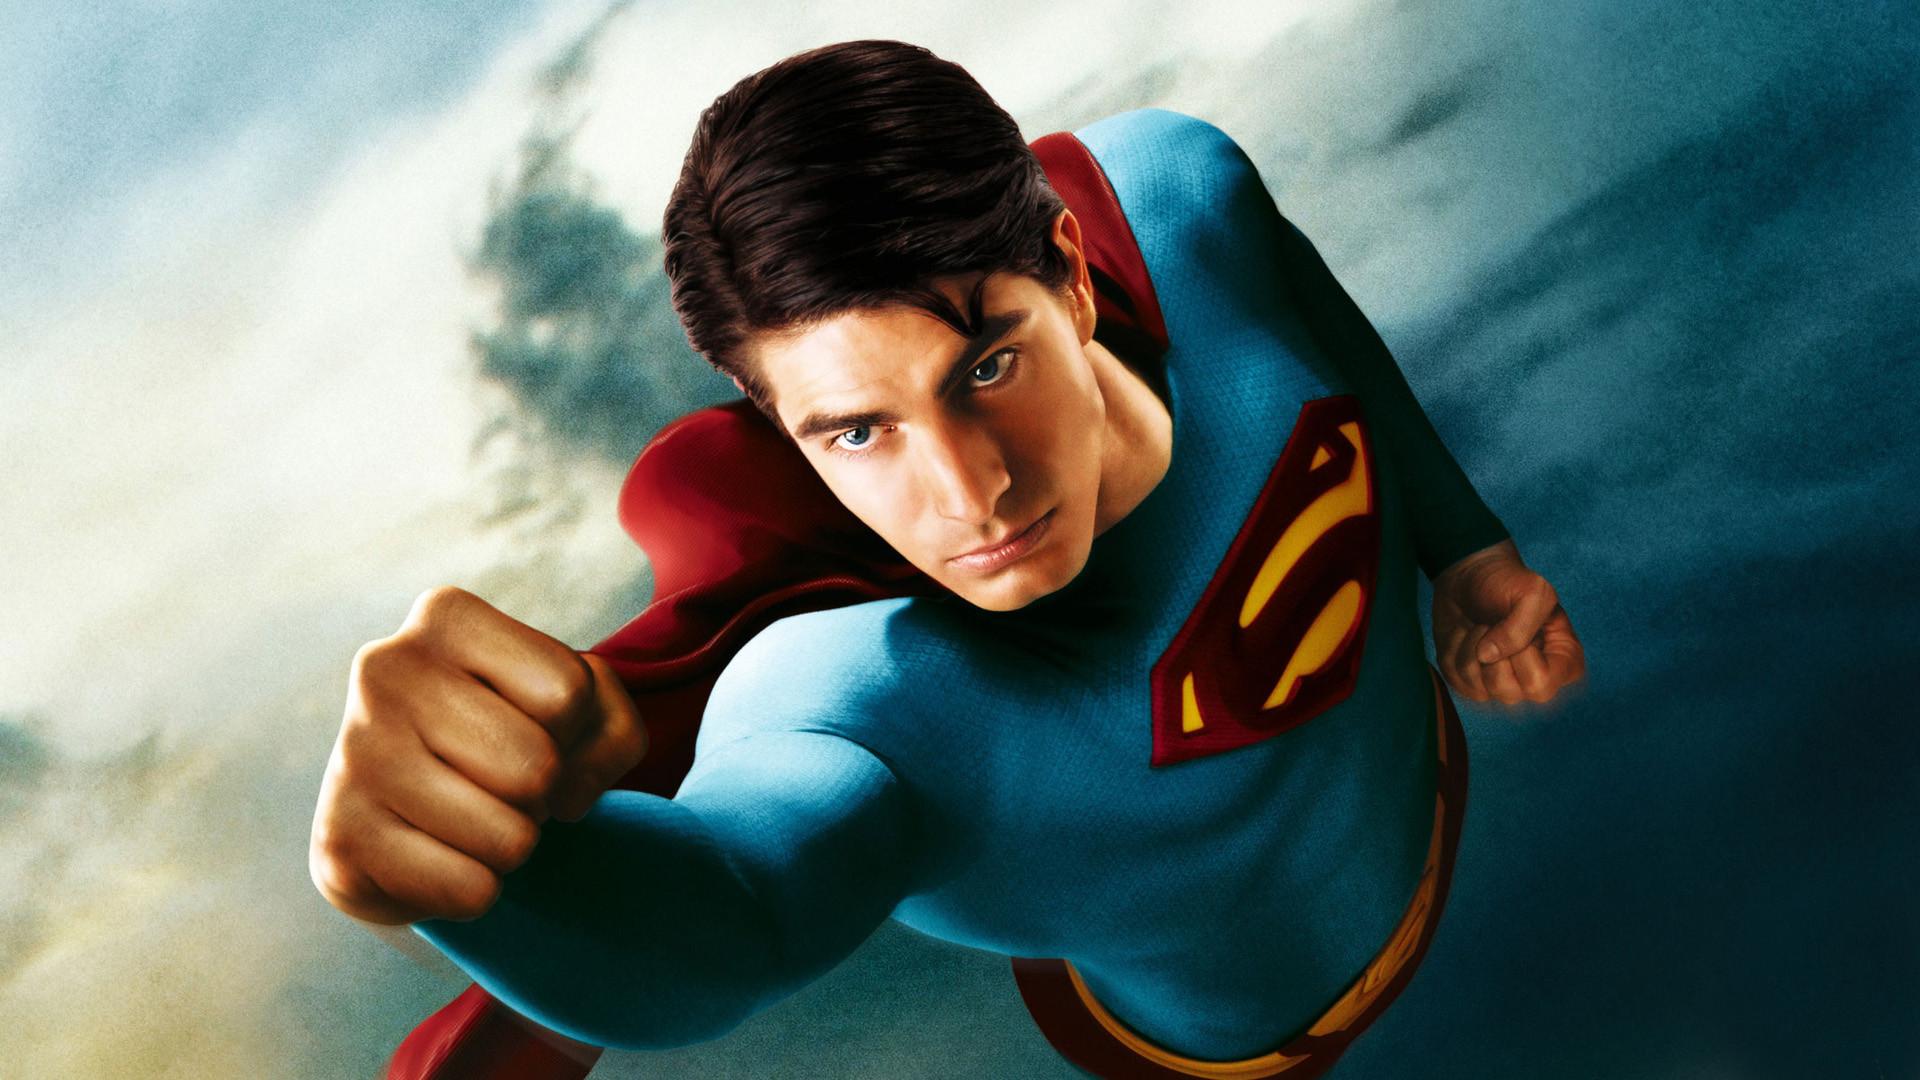 Former Superman, Brandon Routh, Cast as the Atom in CW's Arrow | Geek Outpost